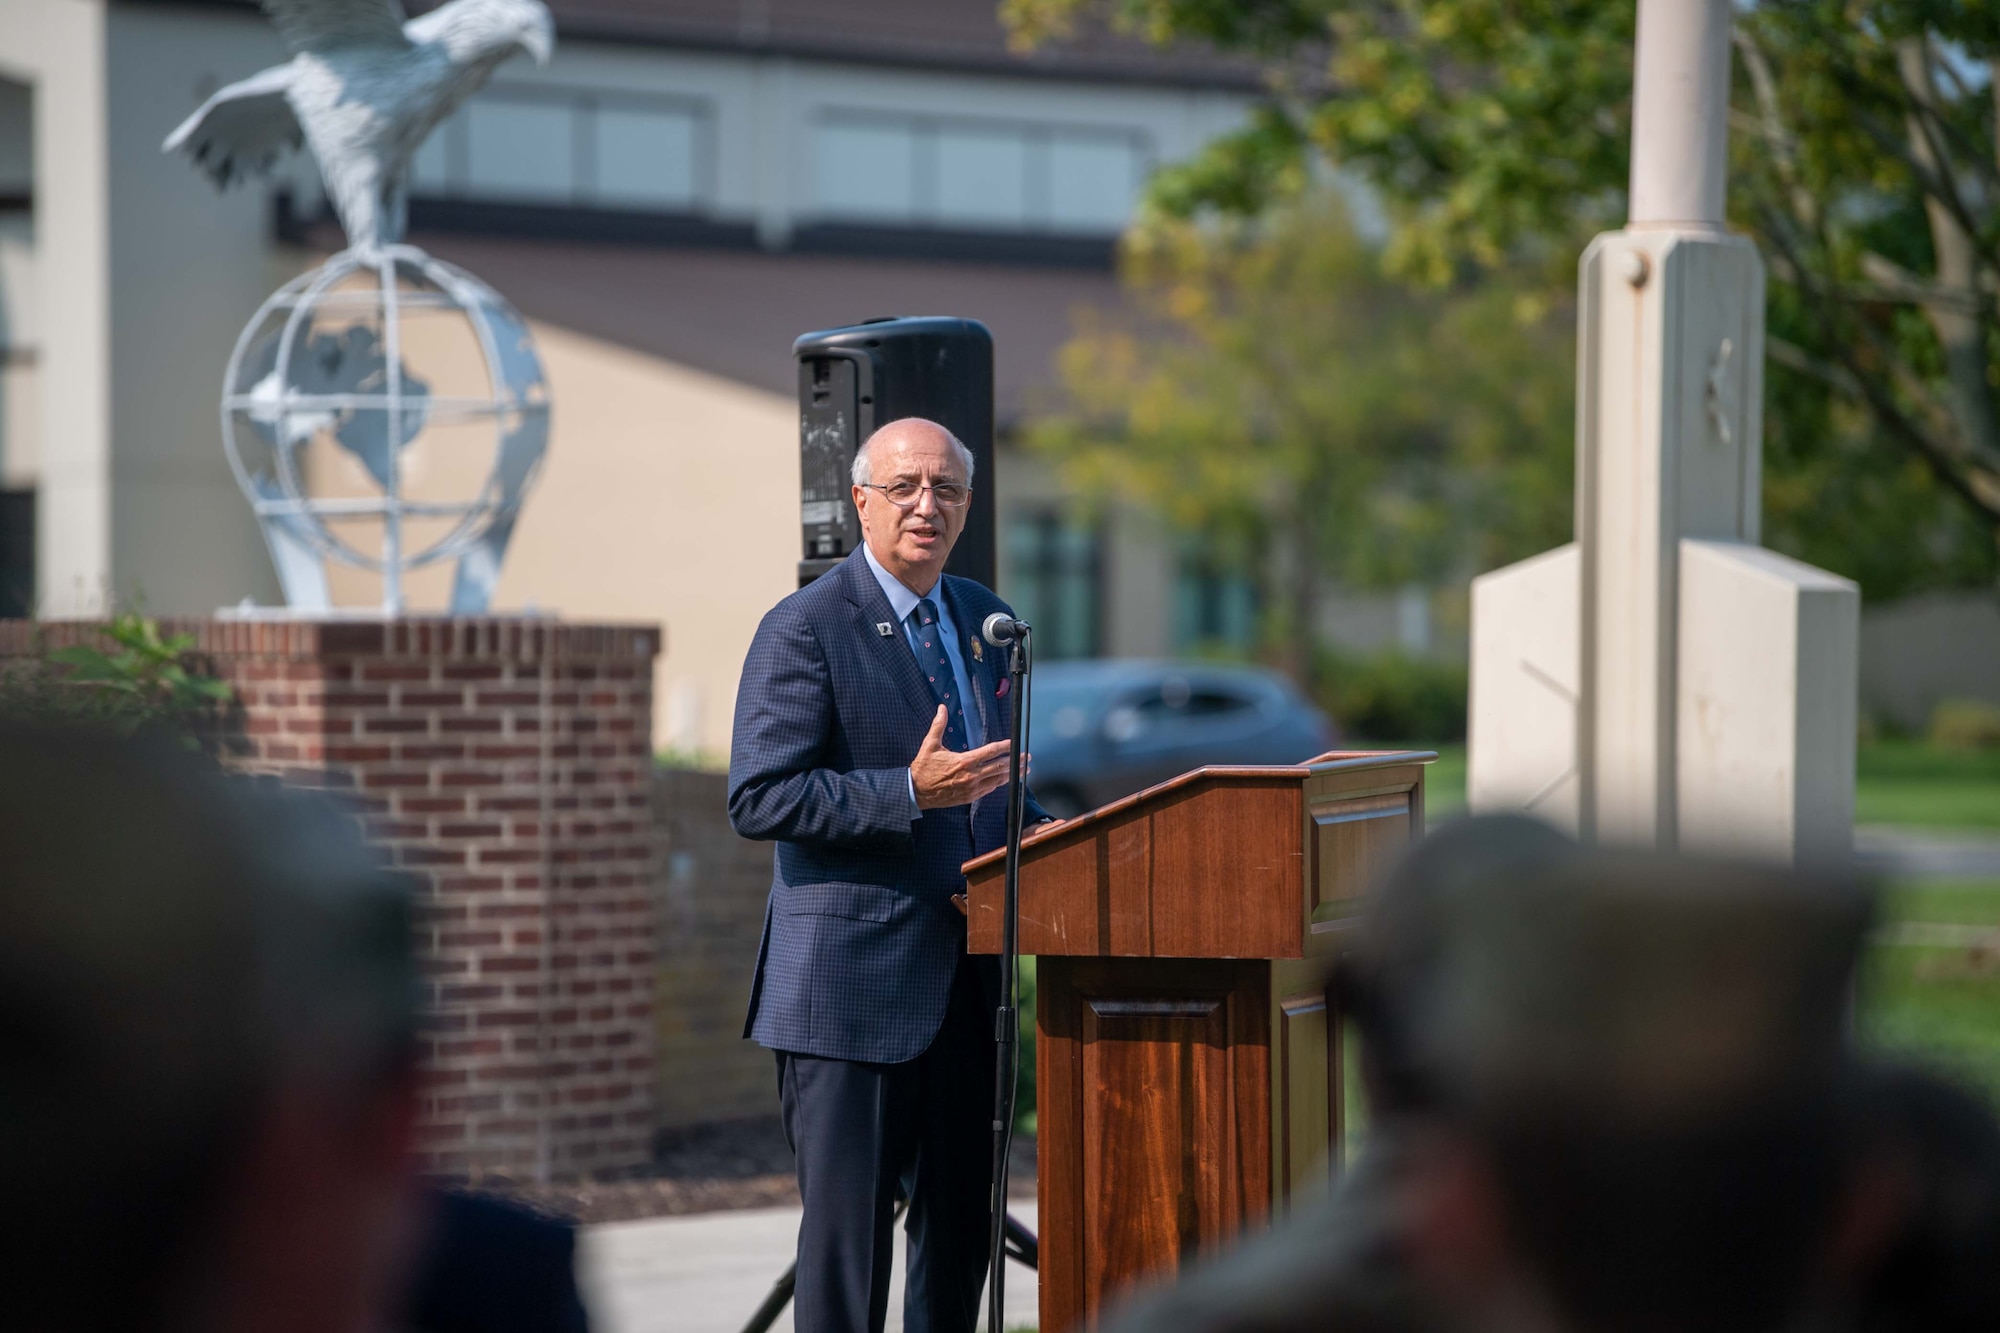 Ralph Galati, Air Force veteran and former prisoner of war, speaks at a retreat ceremony commemorating National POW/MIA Recognition Day on Dover Air Force Base, Delaware, Sept. 16, 2022. Galati was shot down over North Vietnam in 1972 and was a POW for 14 months. (U.S. Air Force photo by Senior Airman Faith Barron)